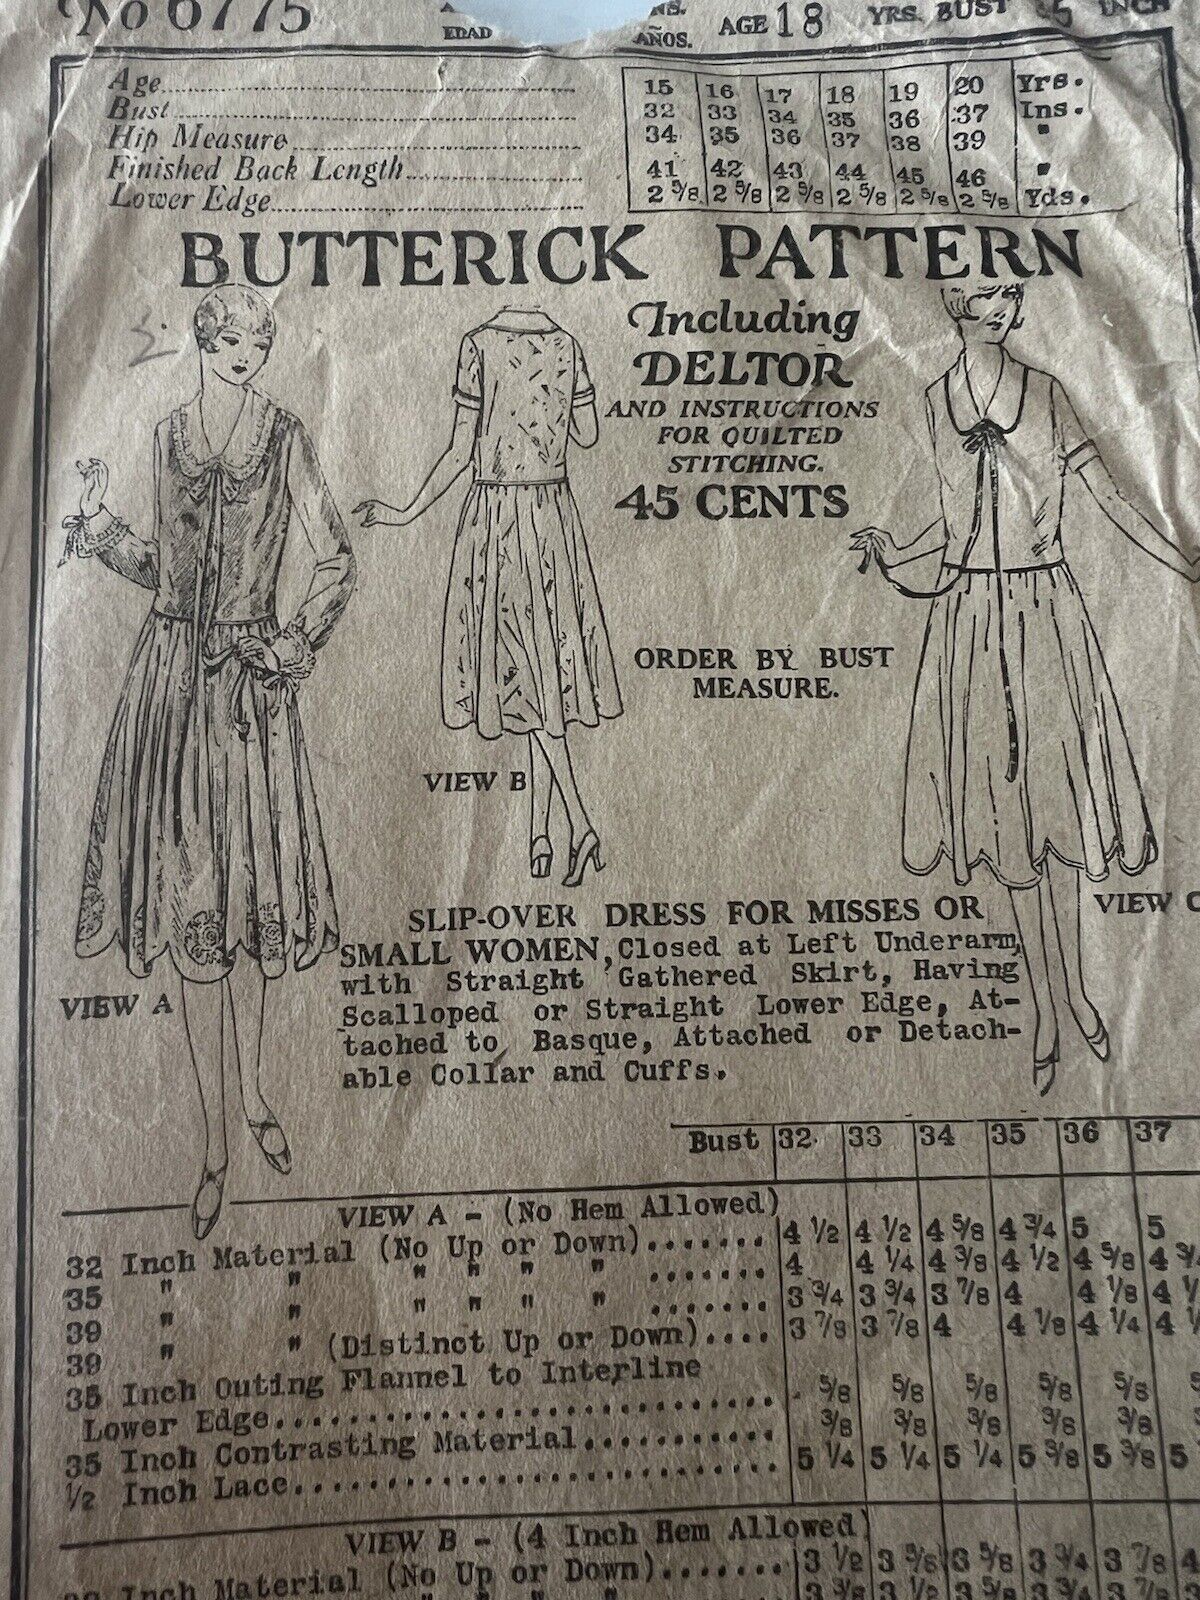 Antique Sewing Pattern 1920s Butterick Women’s Dress Age 18 Bust 35 Inch #6775